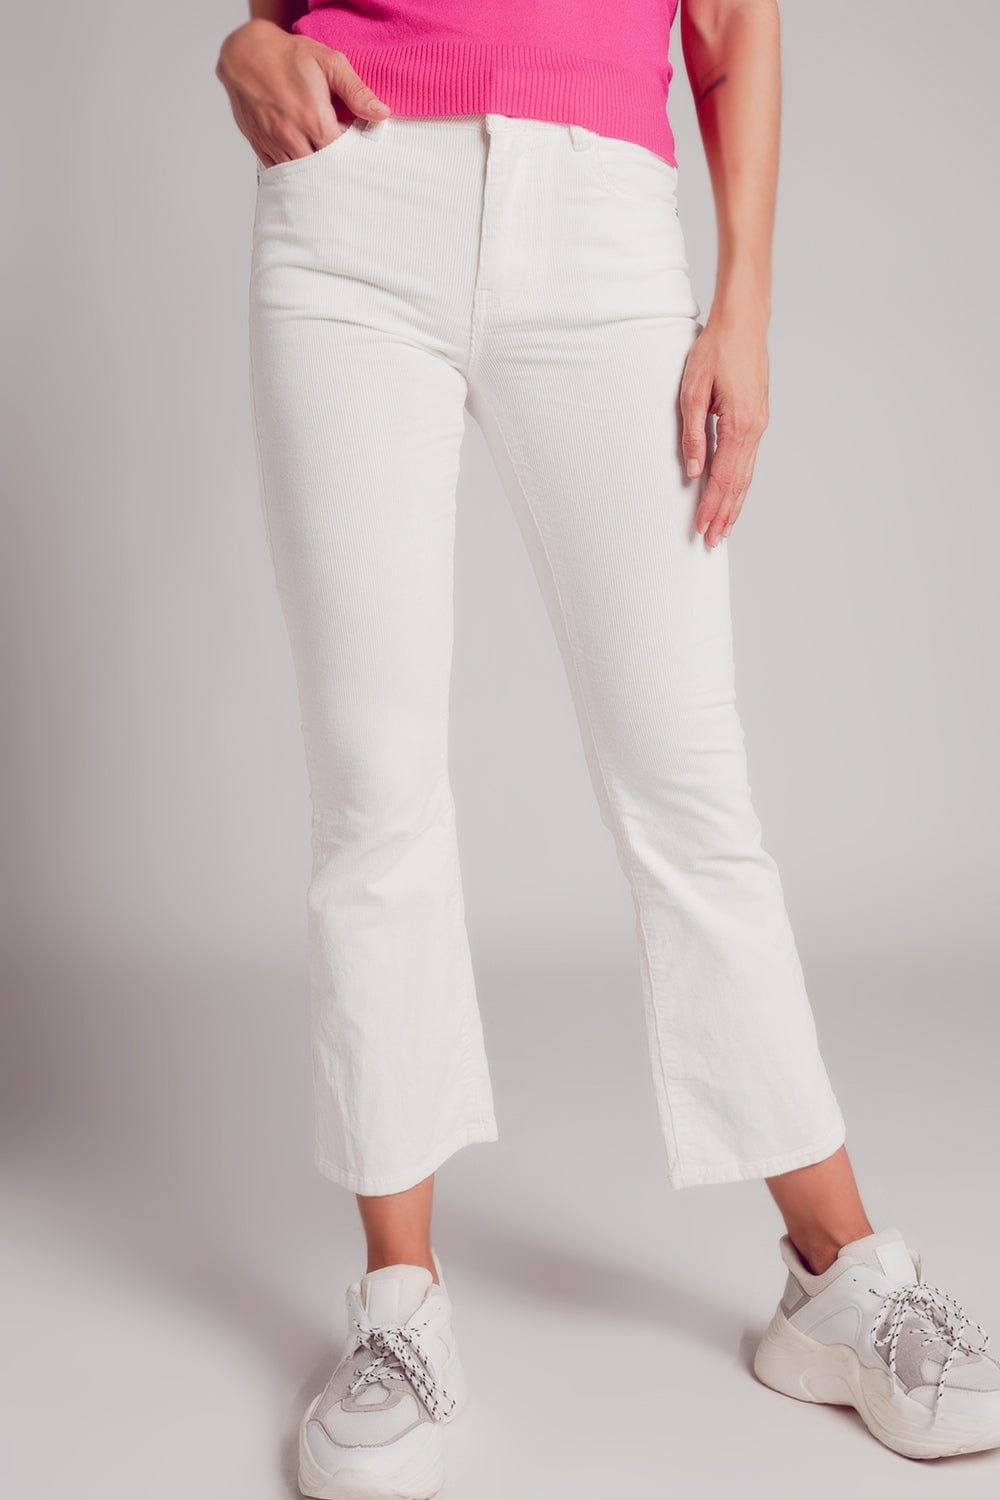 Q2 Women's Pants & Trousers Cord Flare in White